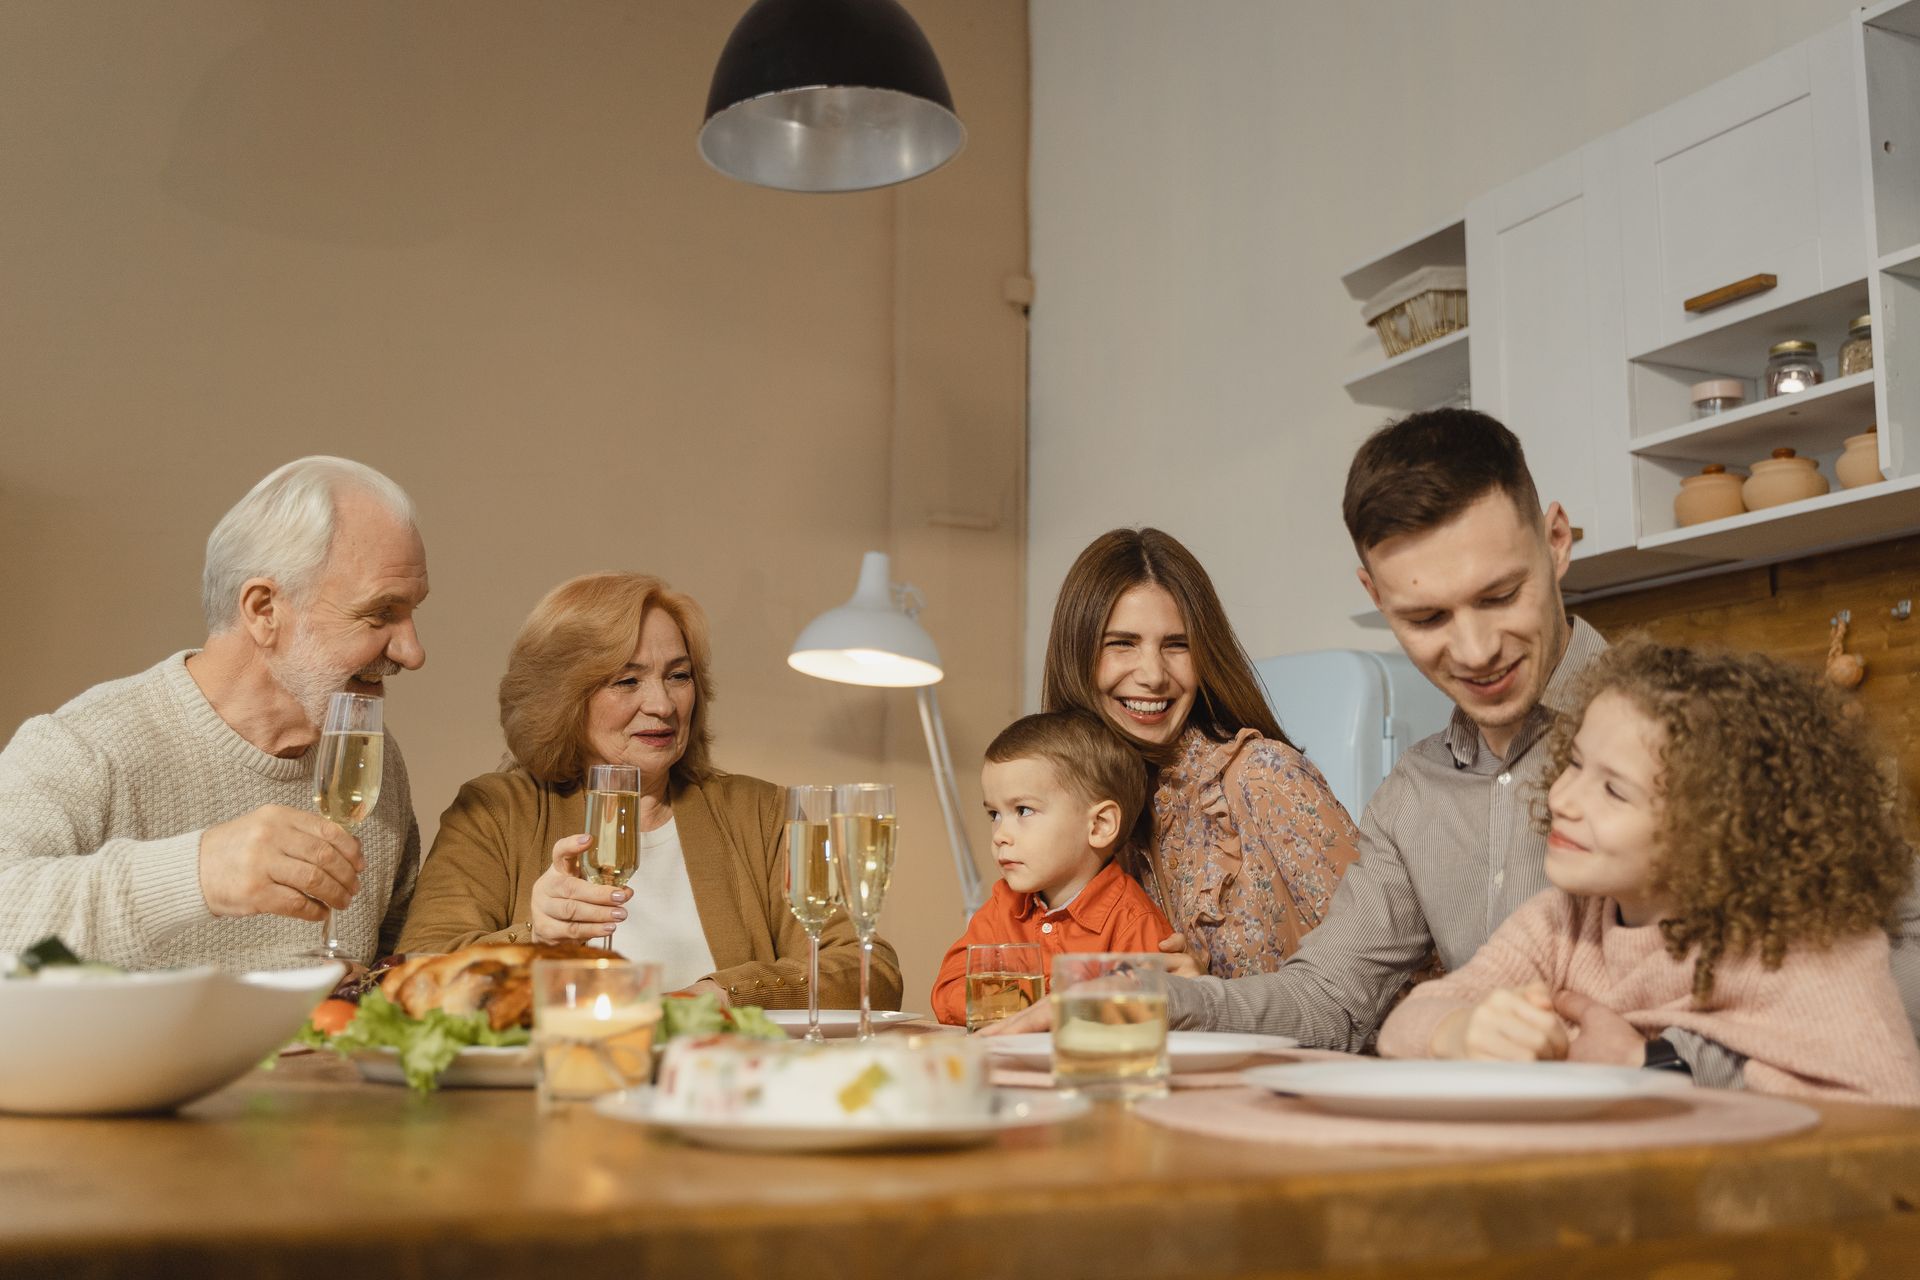 Happy family eating together - includes grandparents, parents, and two children